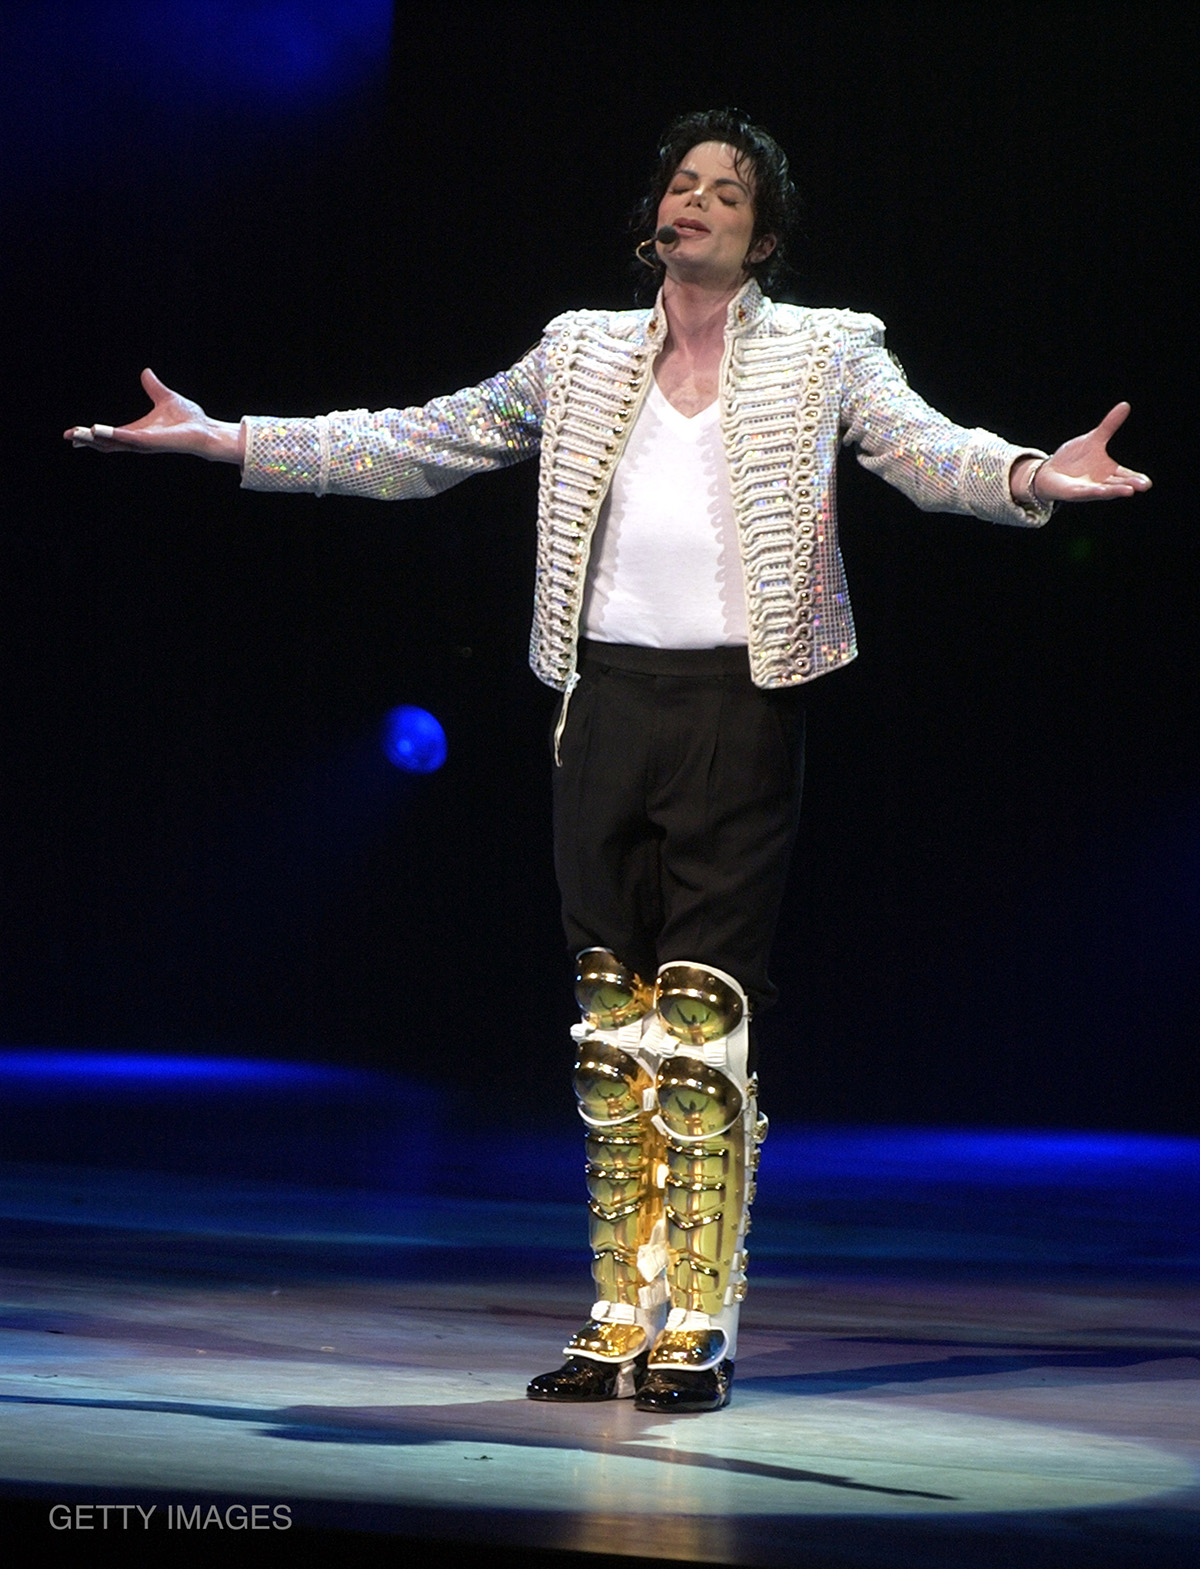 Michael Jackson performs at the Democratic National Committee's "A Night at the Apollo" voter registration drive and fundraiser at the Apollo Theater in New York, NY, in April 2002.